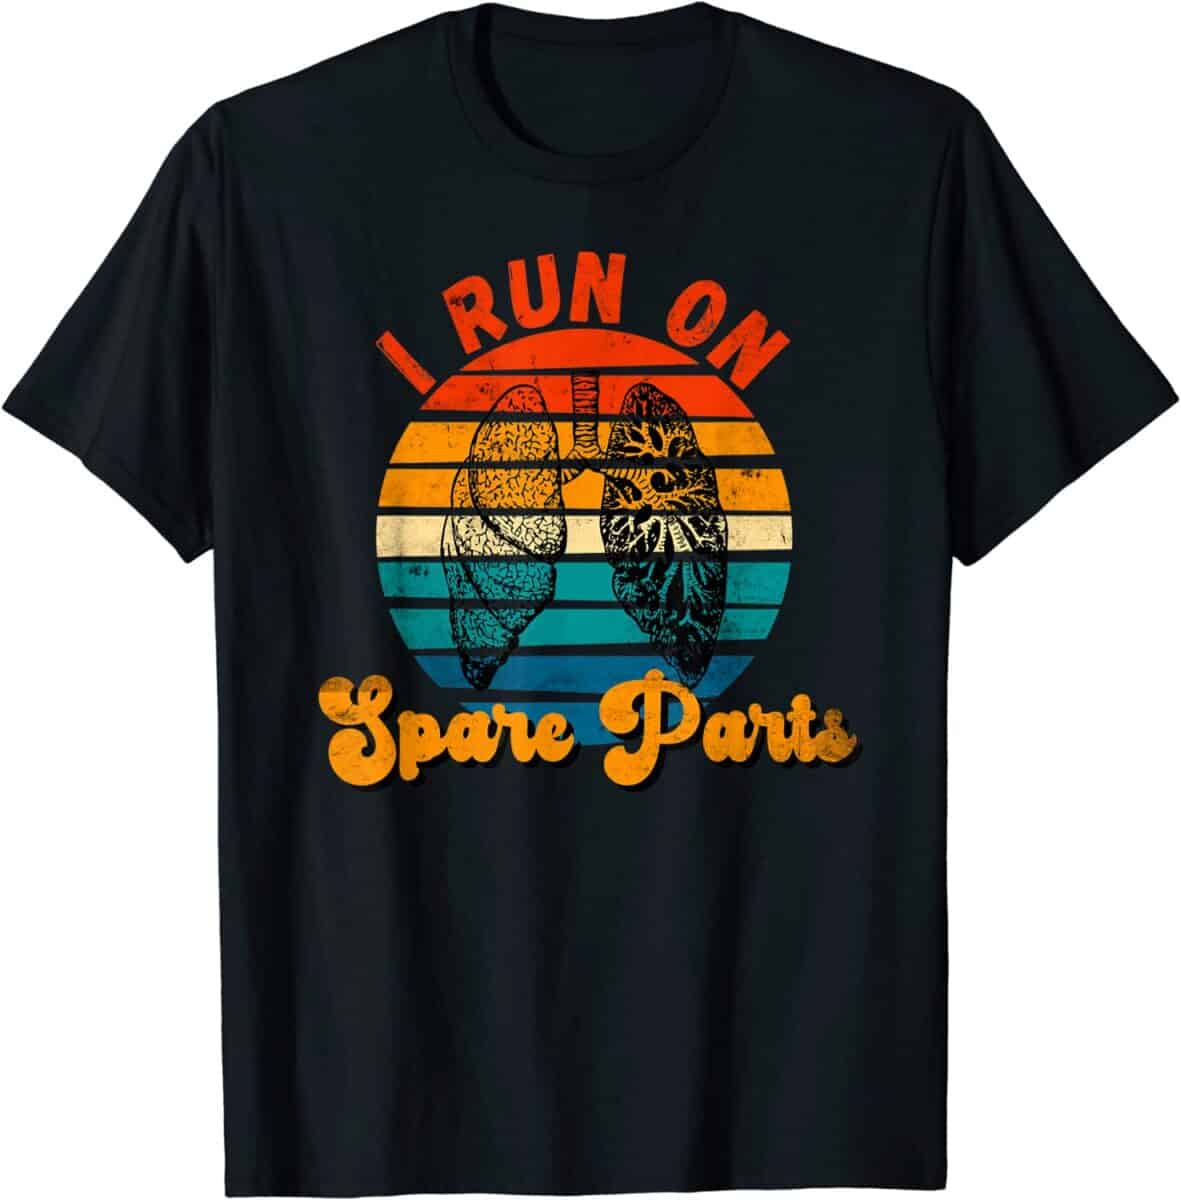 Black t shirt with lung image and text saying I run on spare parts.